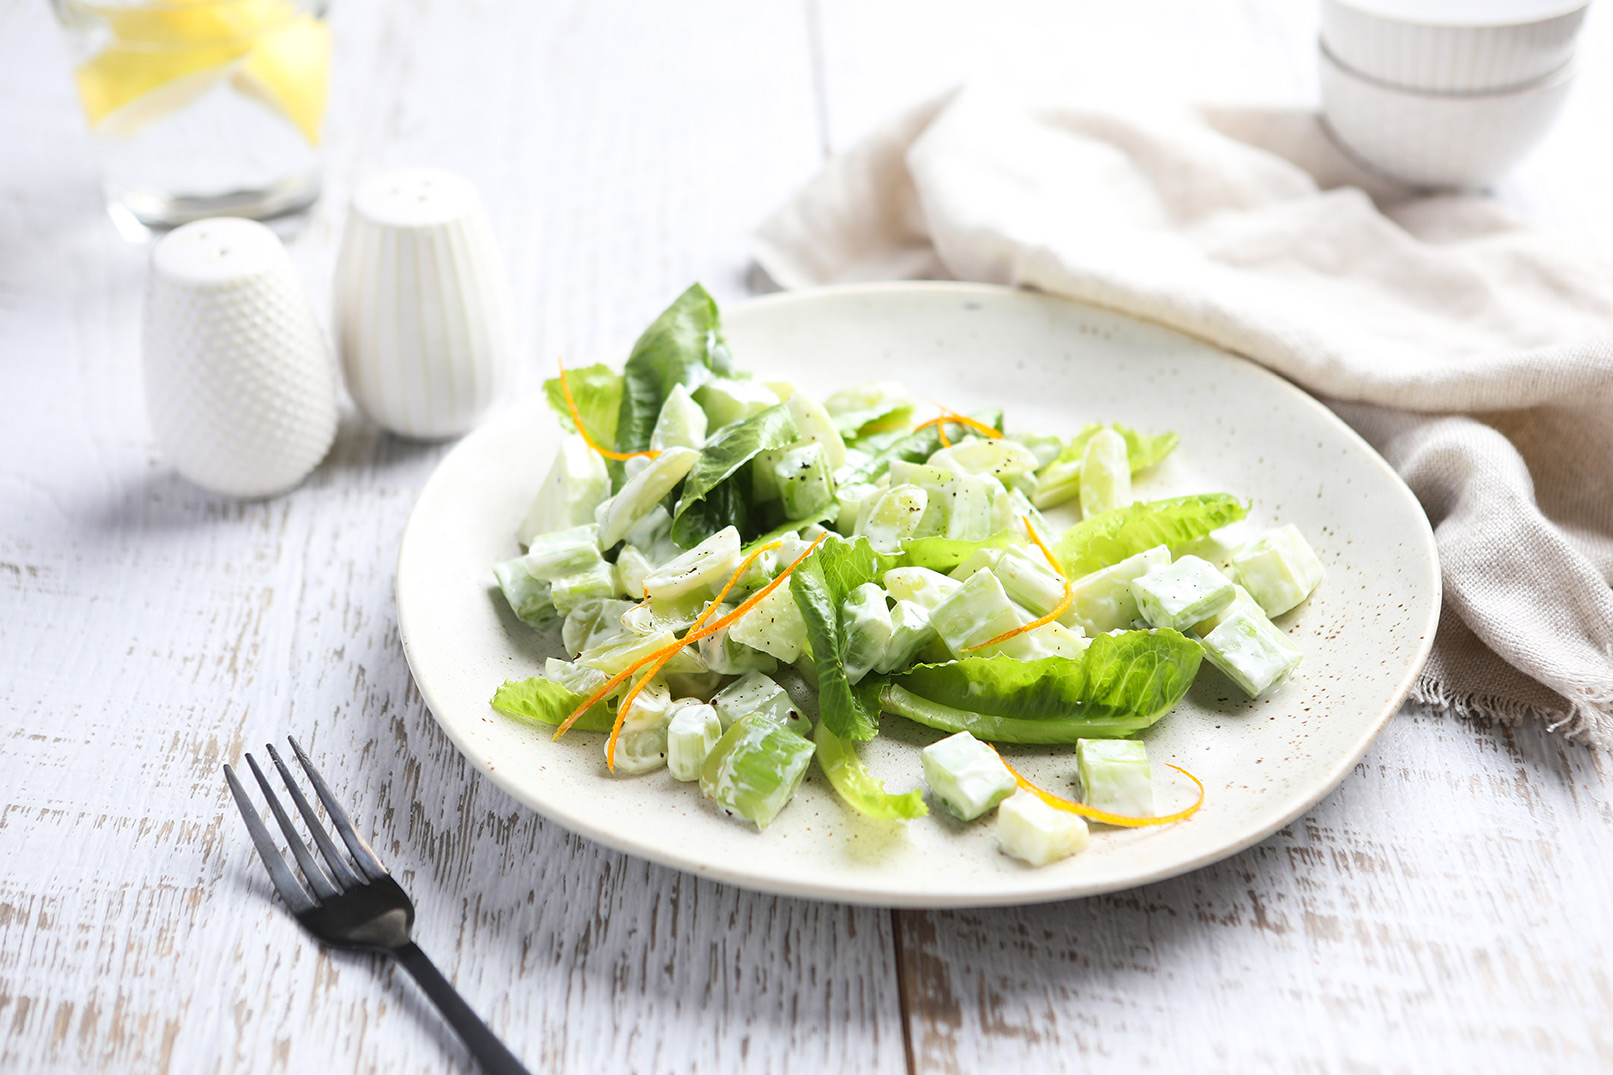 Image of waldorf salad on a white plate with a fork, white cloth napkin and salt and pepper shakers